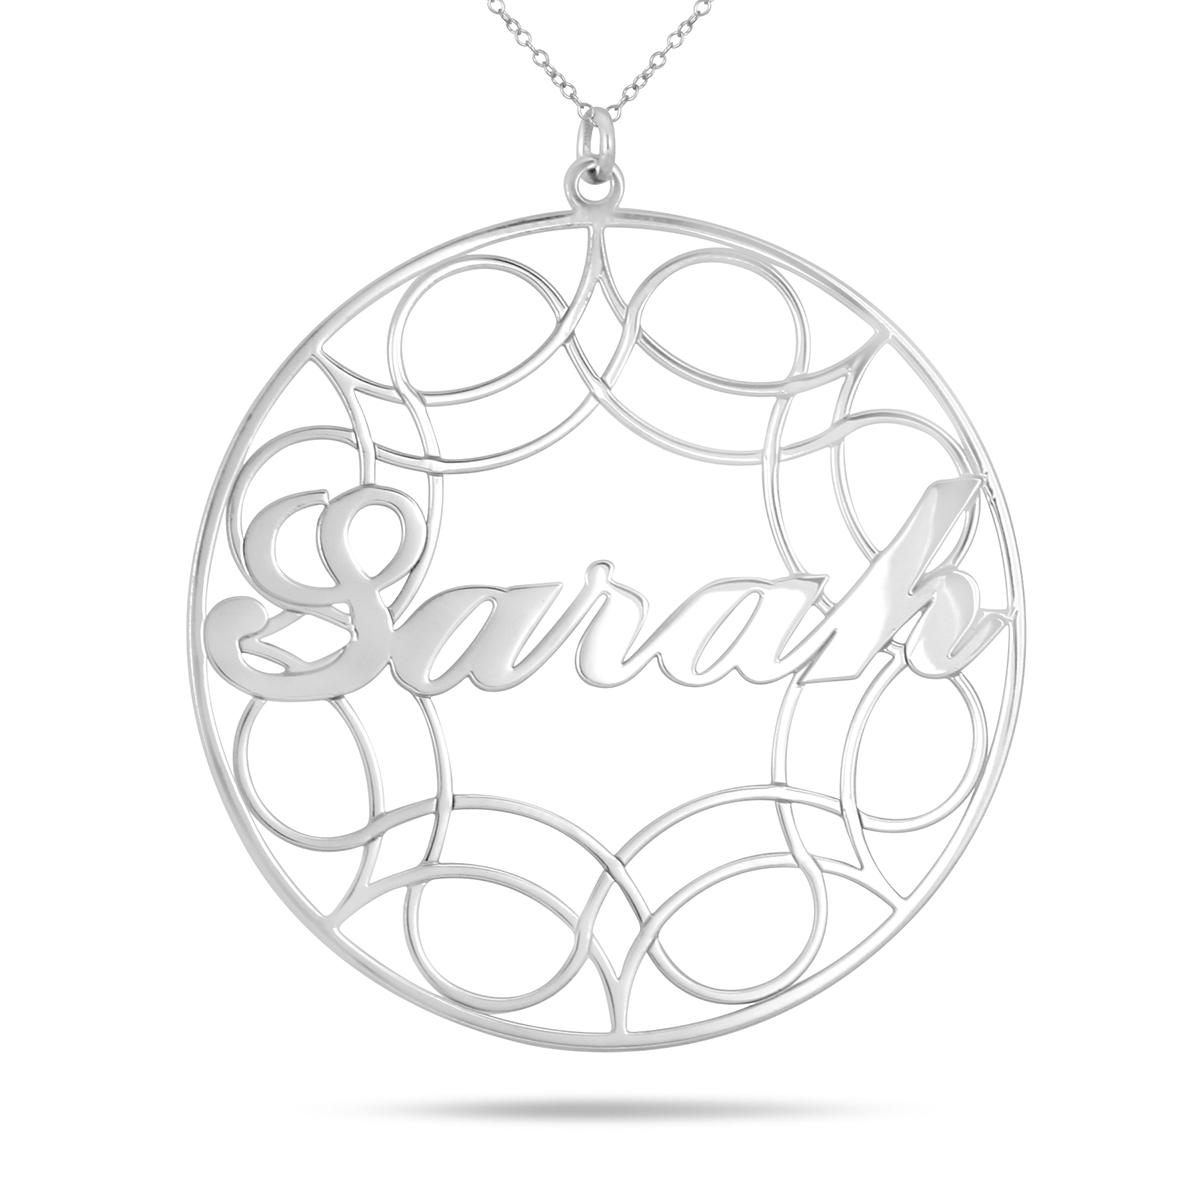 Custom Name Circle Pendant Necklace in .925 Sterling Silver